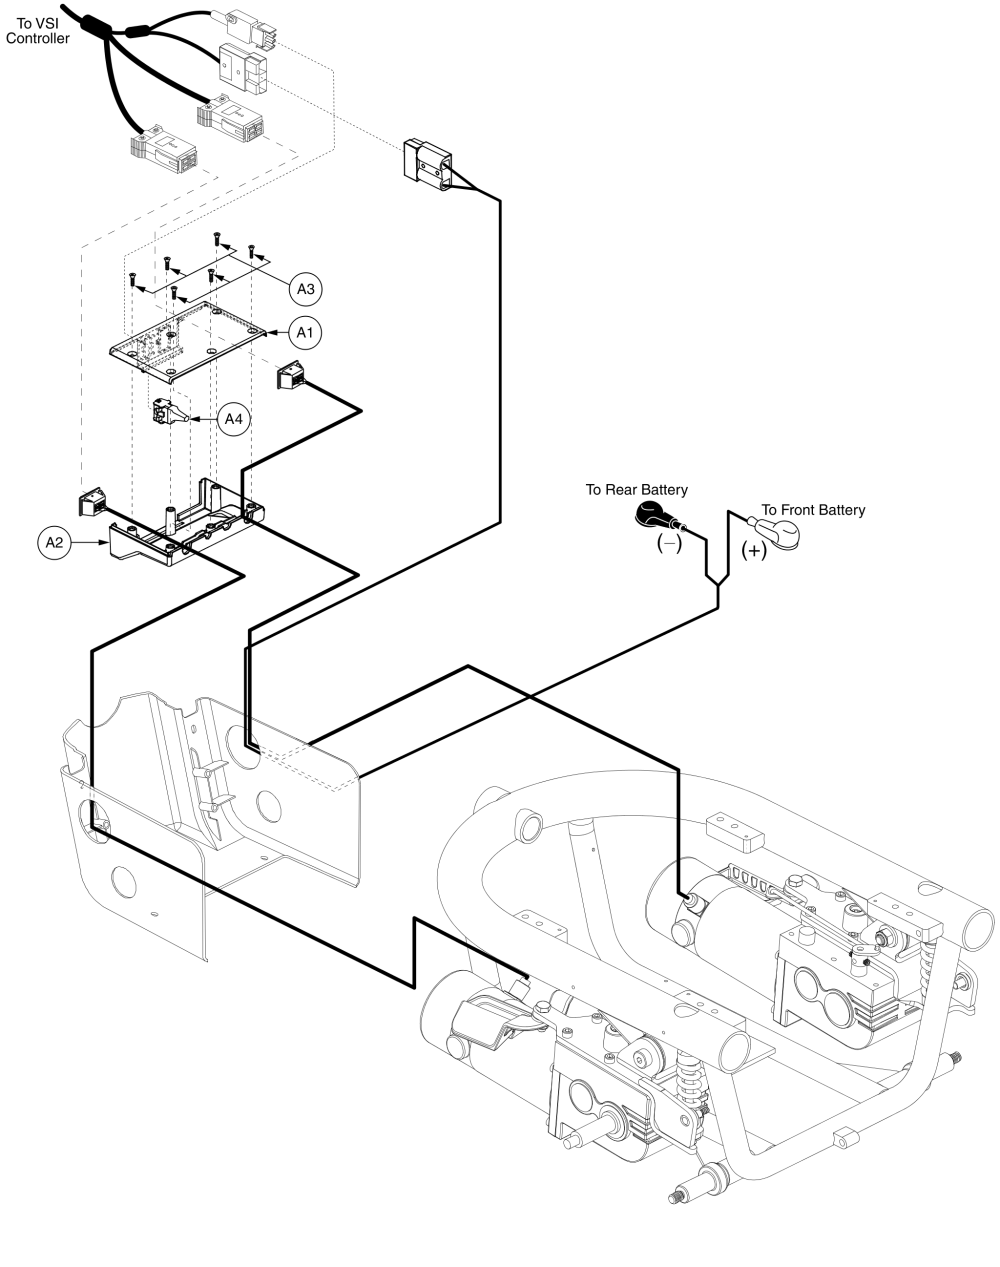 Vsi, Off-board Charger, Electrical Assembly, Jazzy 610 parts diagram